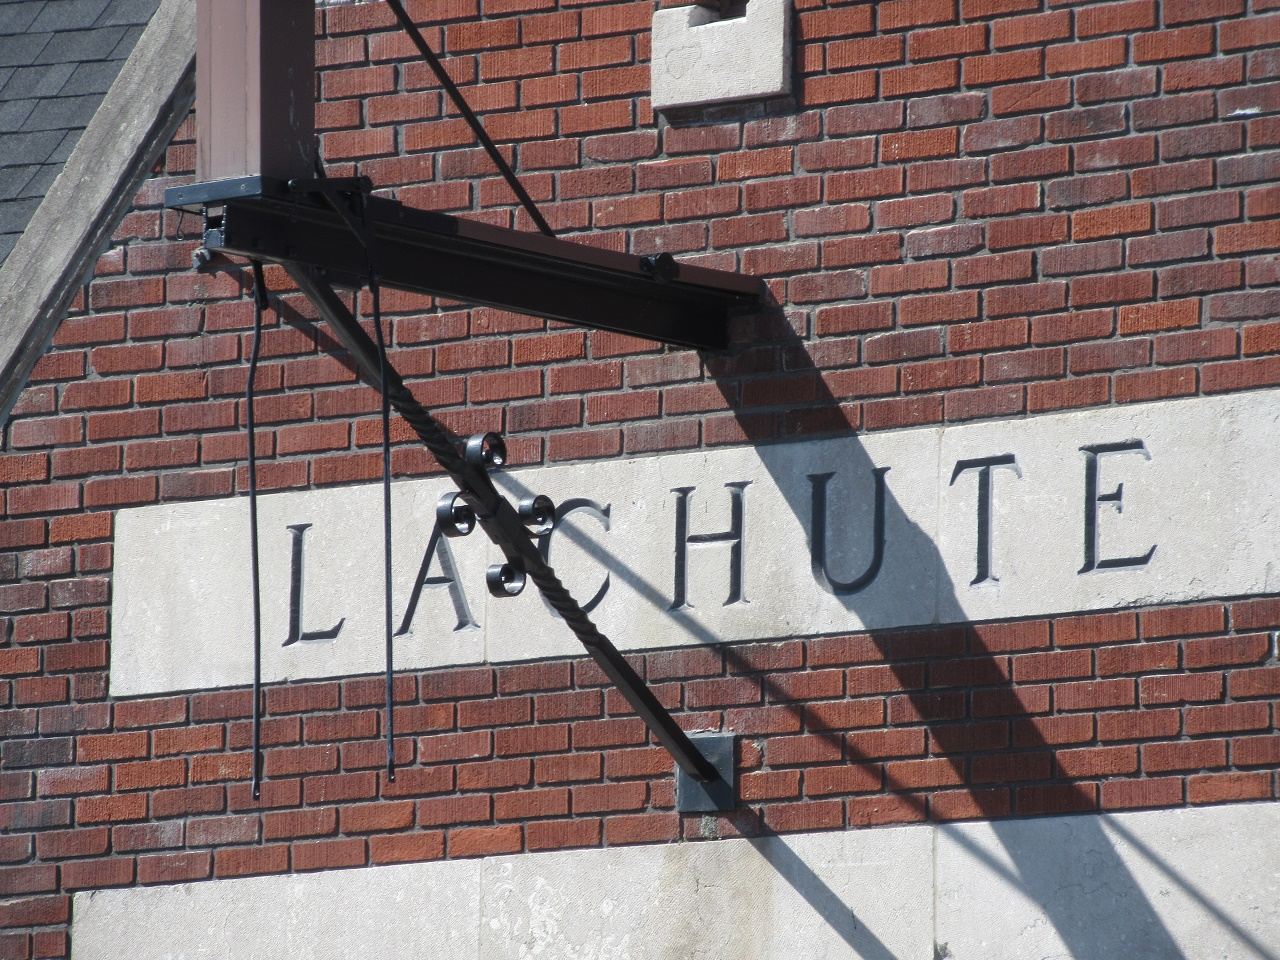 Only authorized caregivers permitted to visit at Lachute hospital